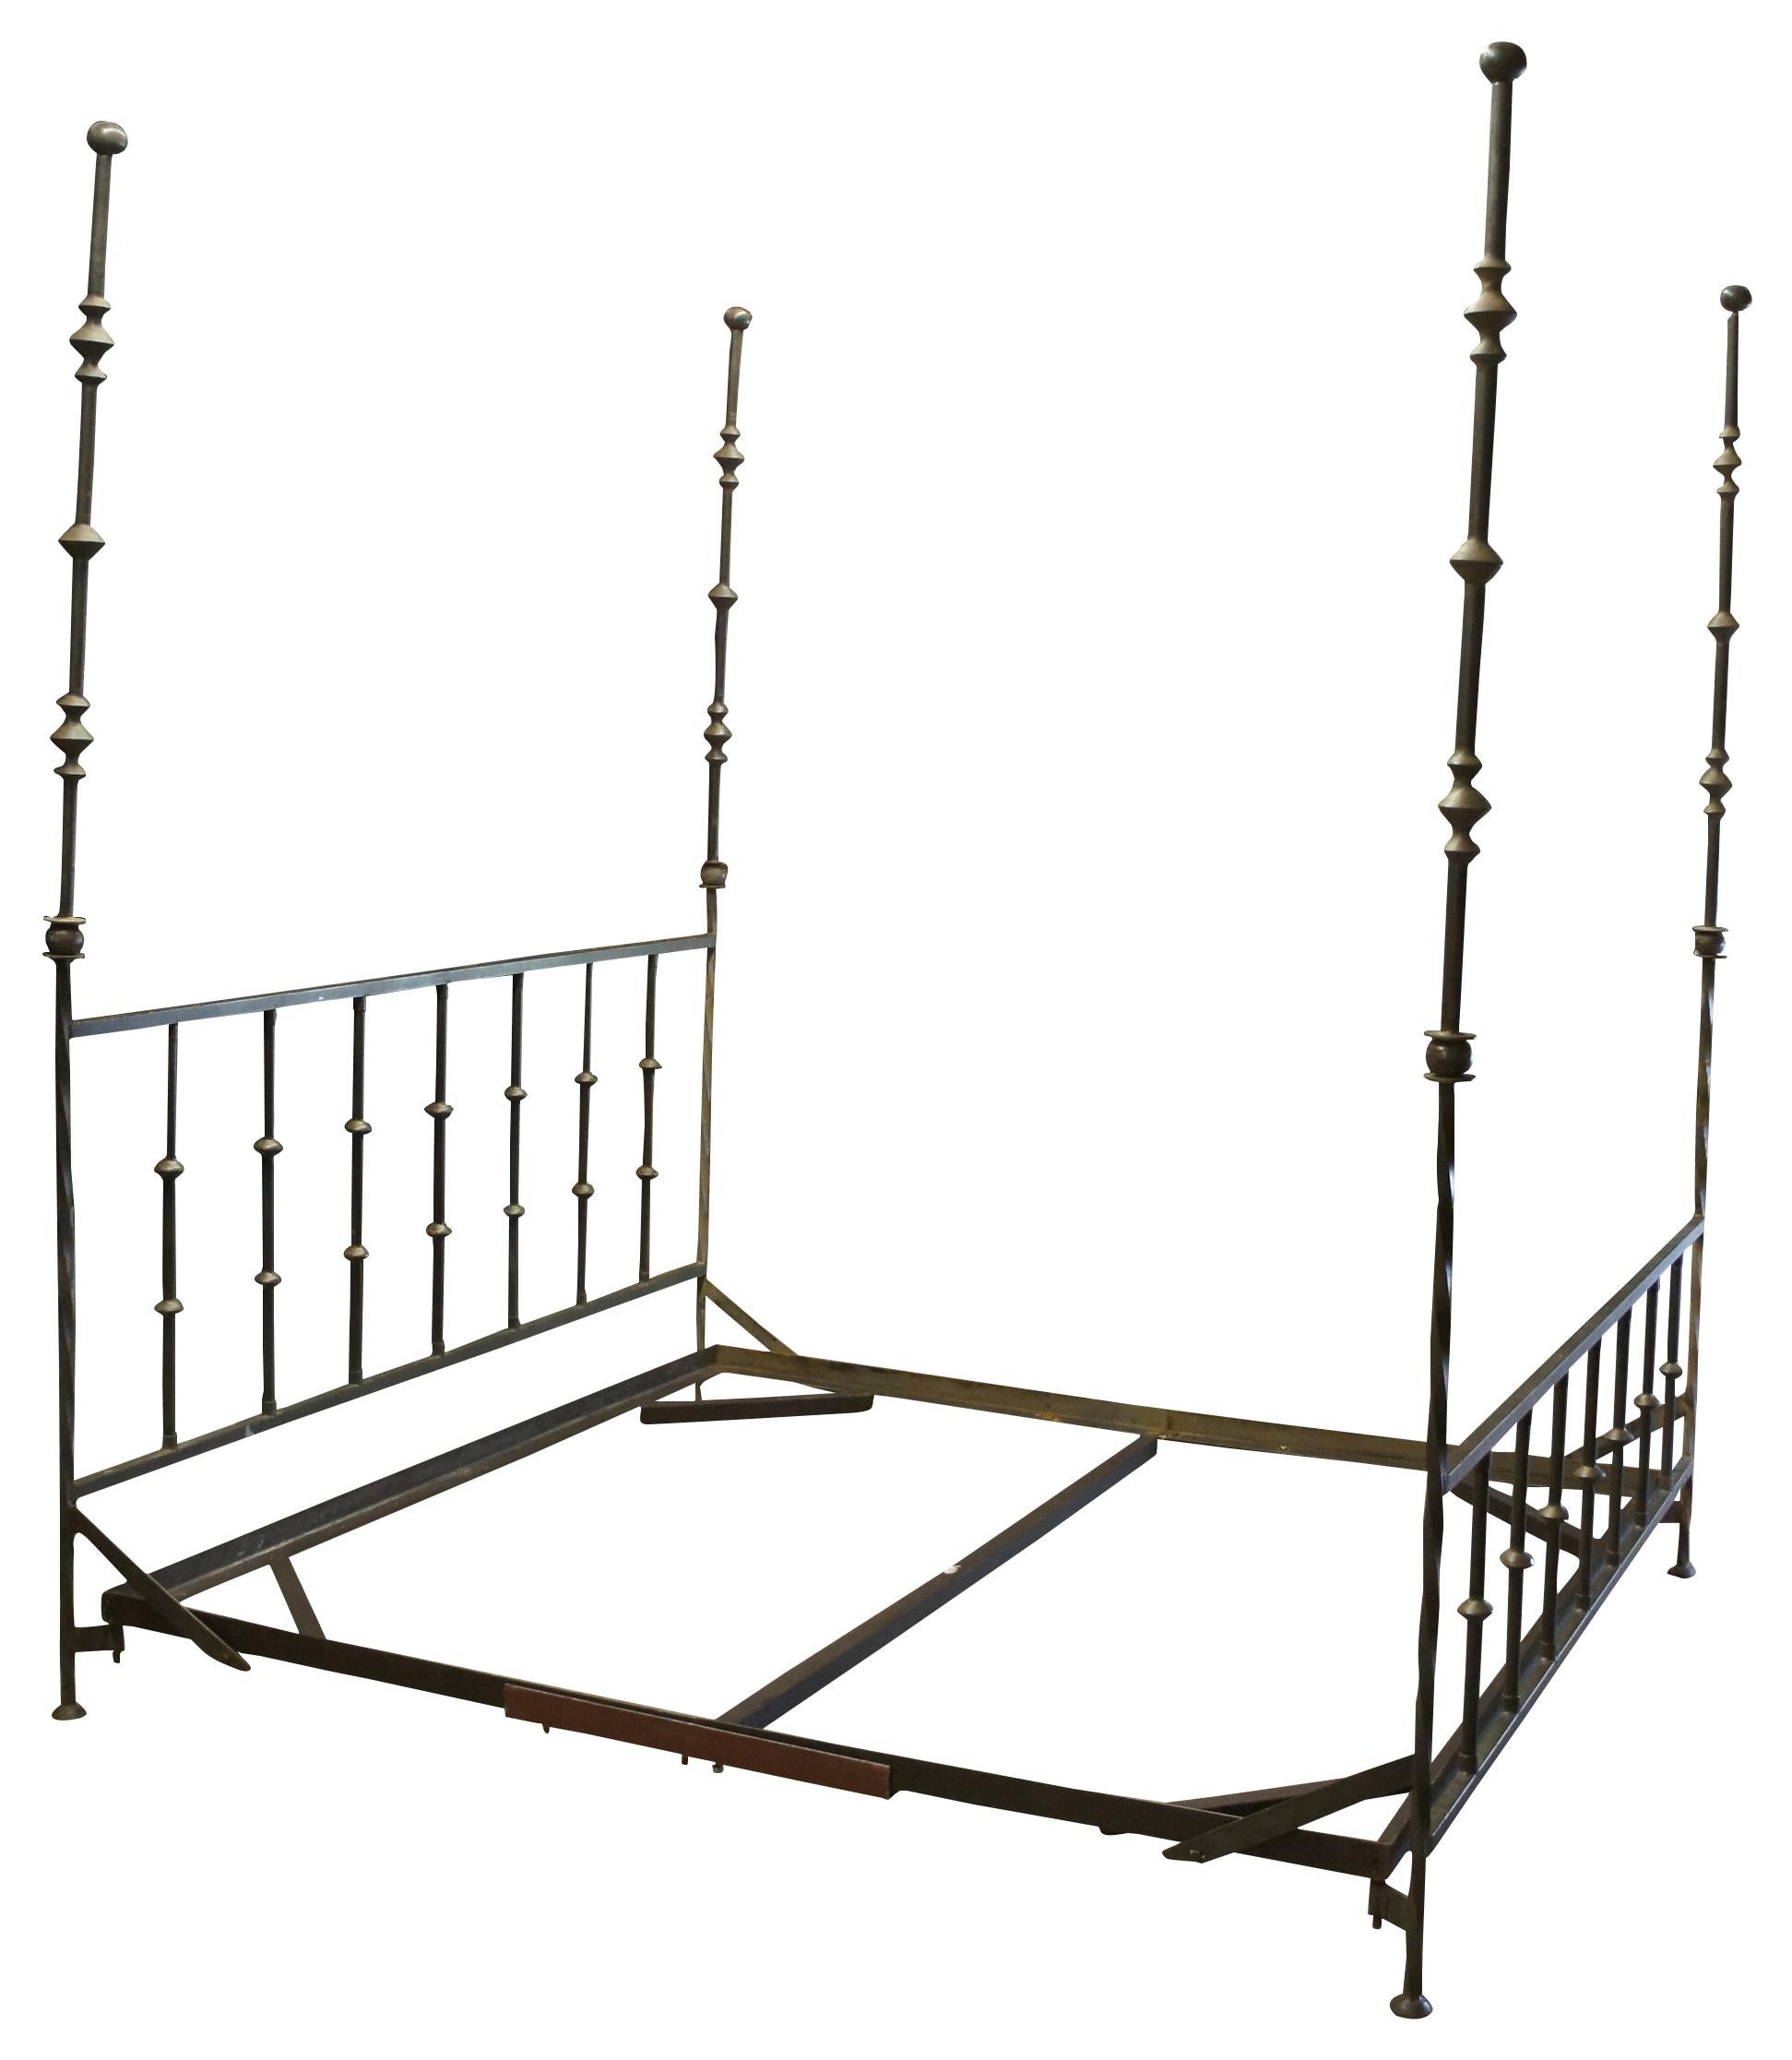 Kreiss Provence Grande Kings Poster bed. Made from wrought iron with scrolled posts with Modern orbed design.

Measures: 82